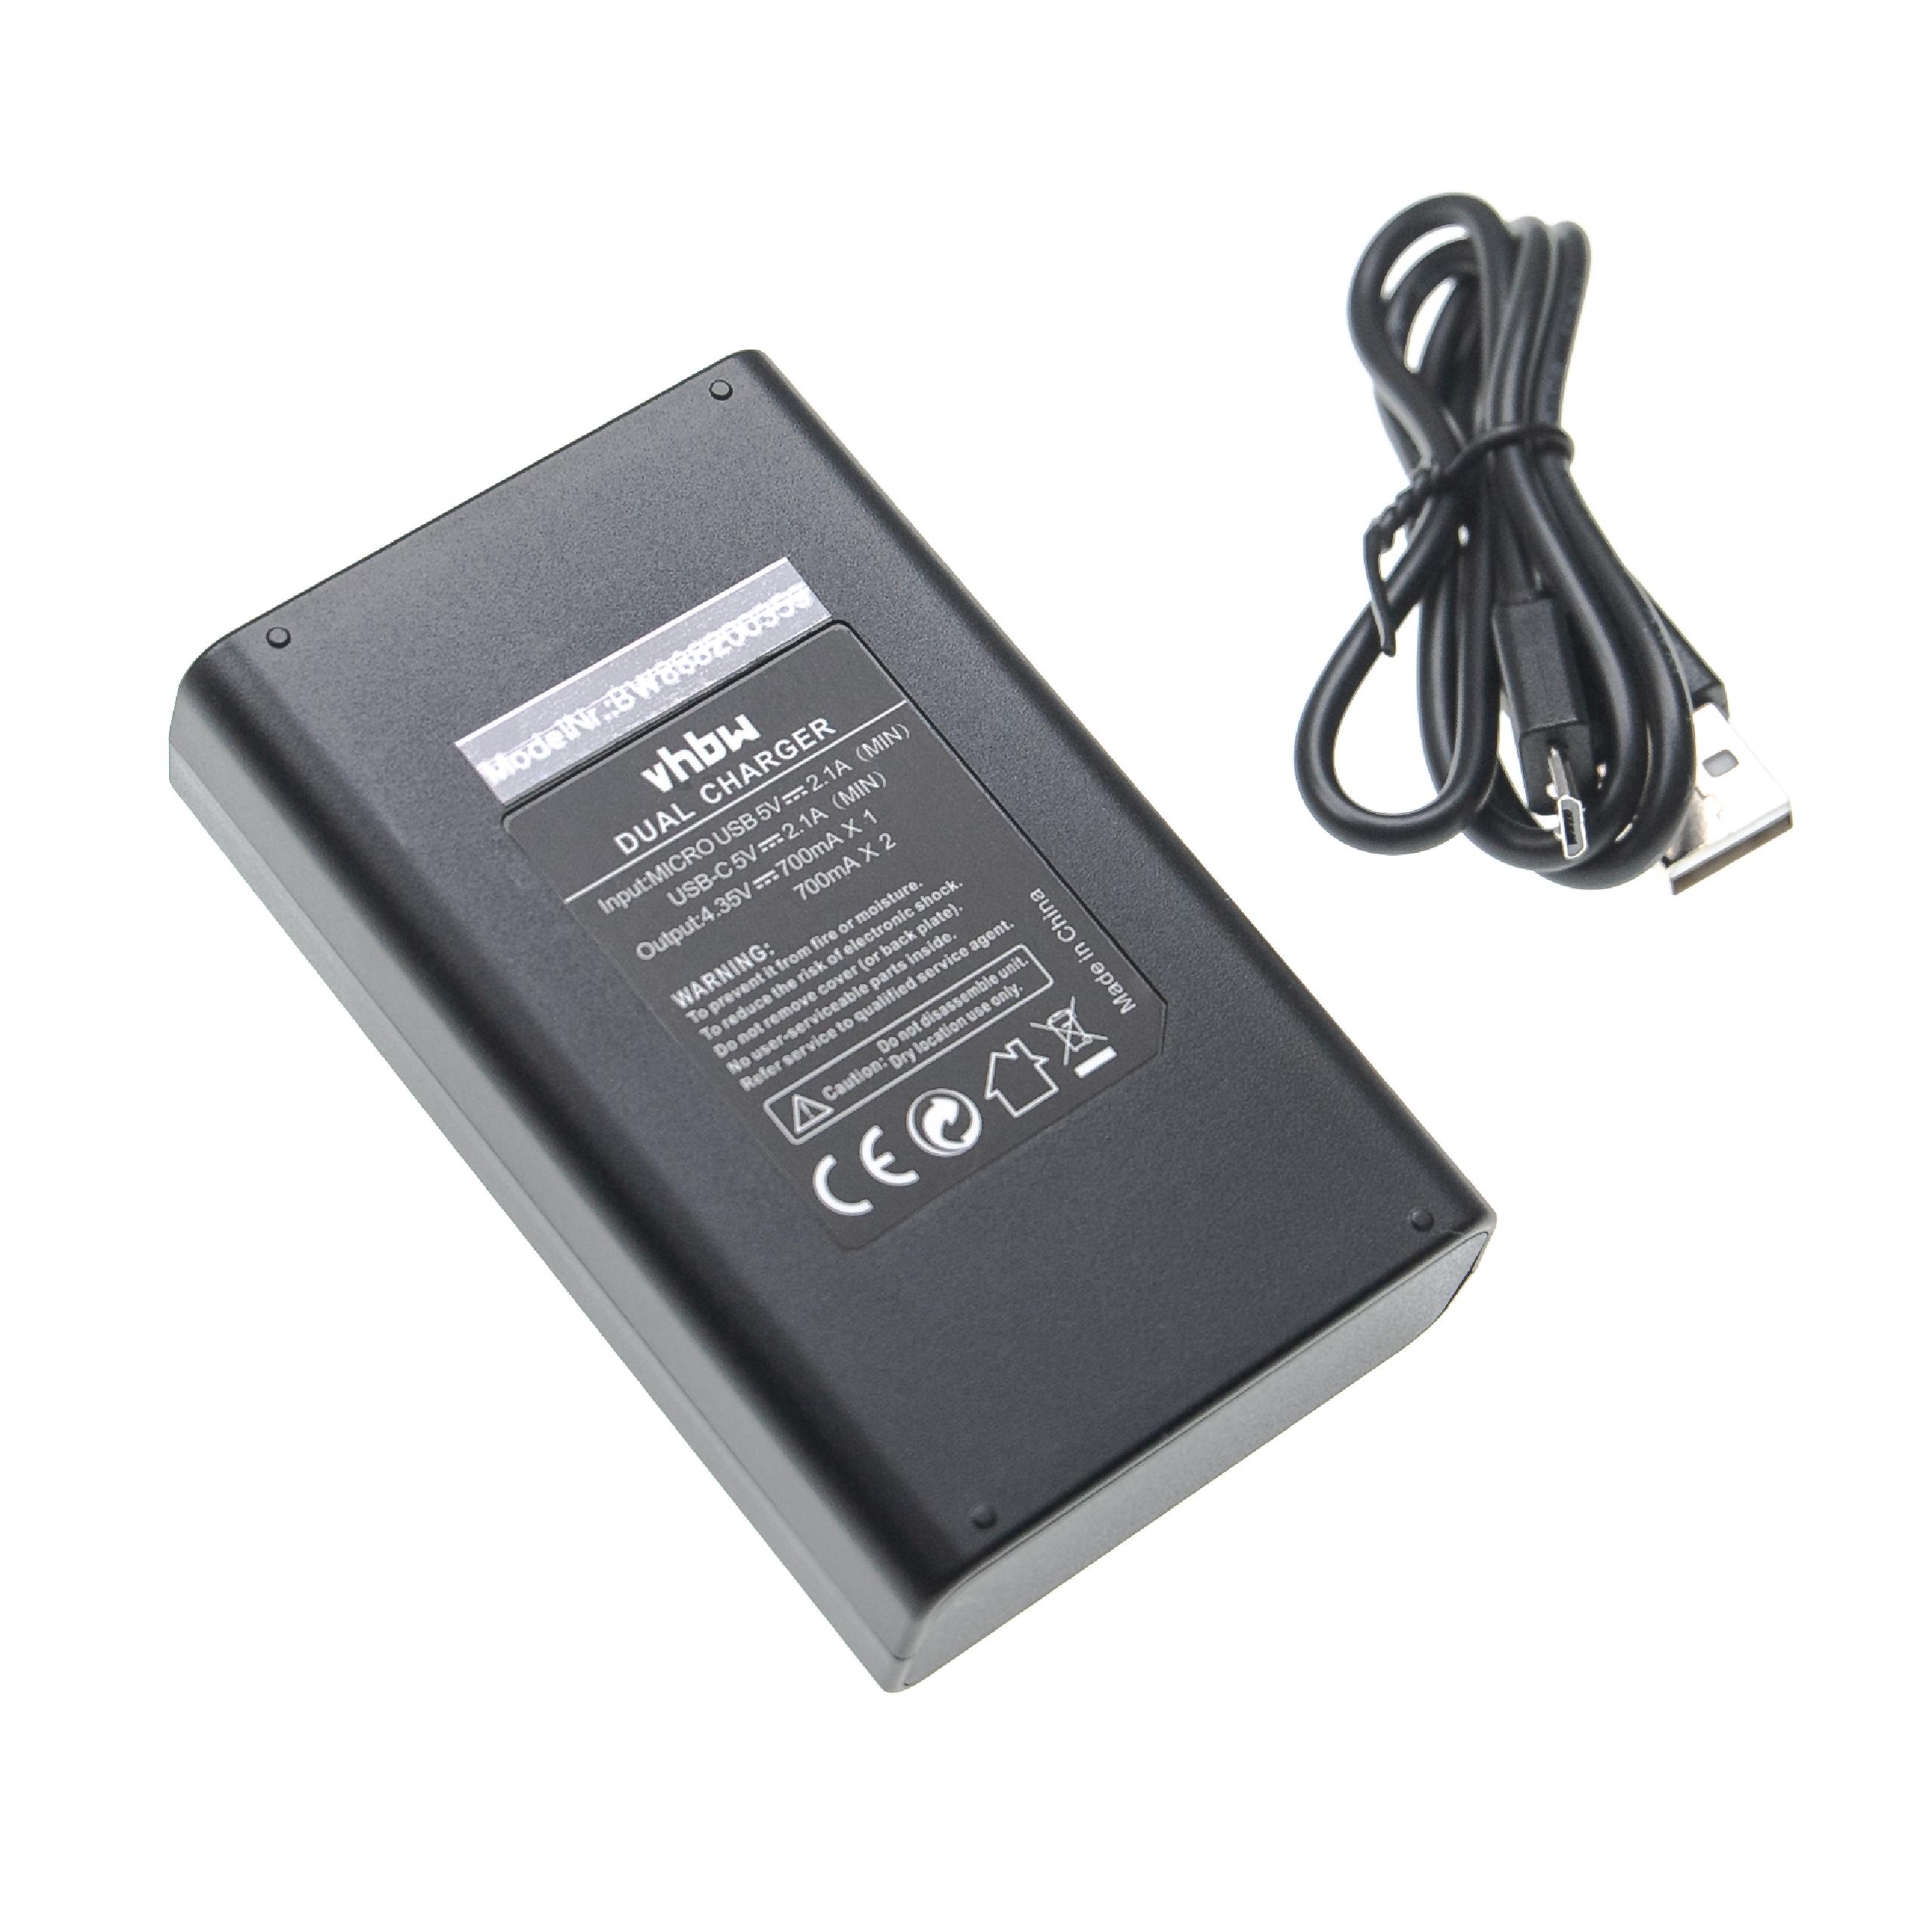 Battery Charger suitable for Hero 9 Camera etc. - 0.7 A, 4.35 V